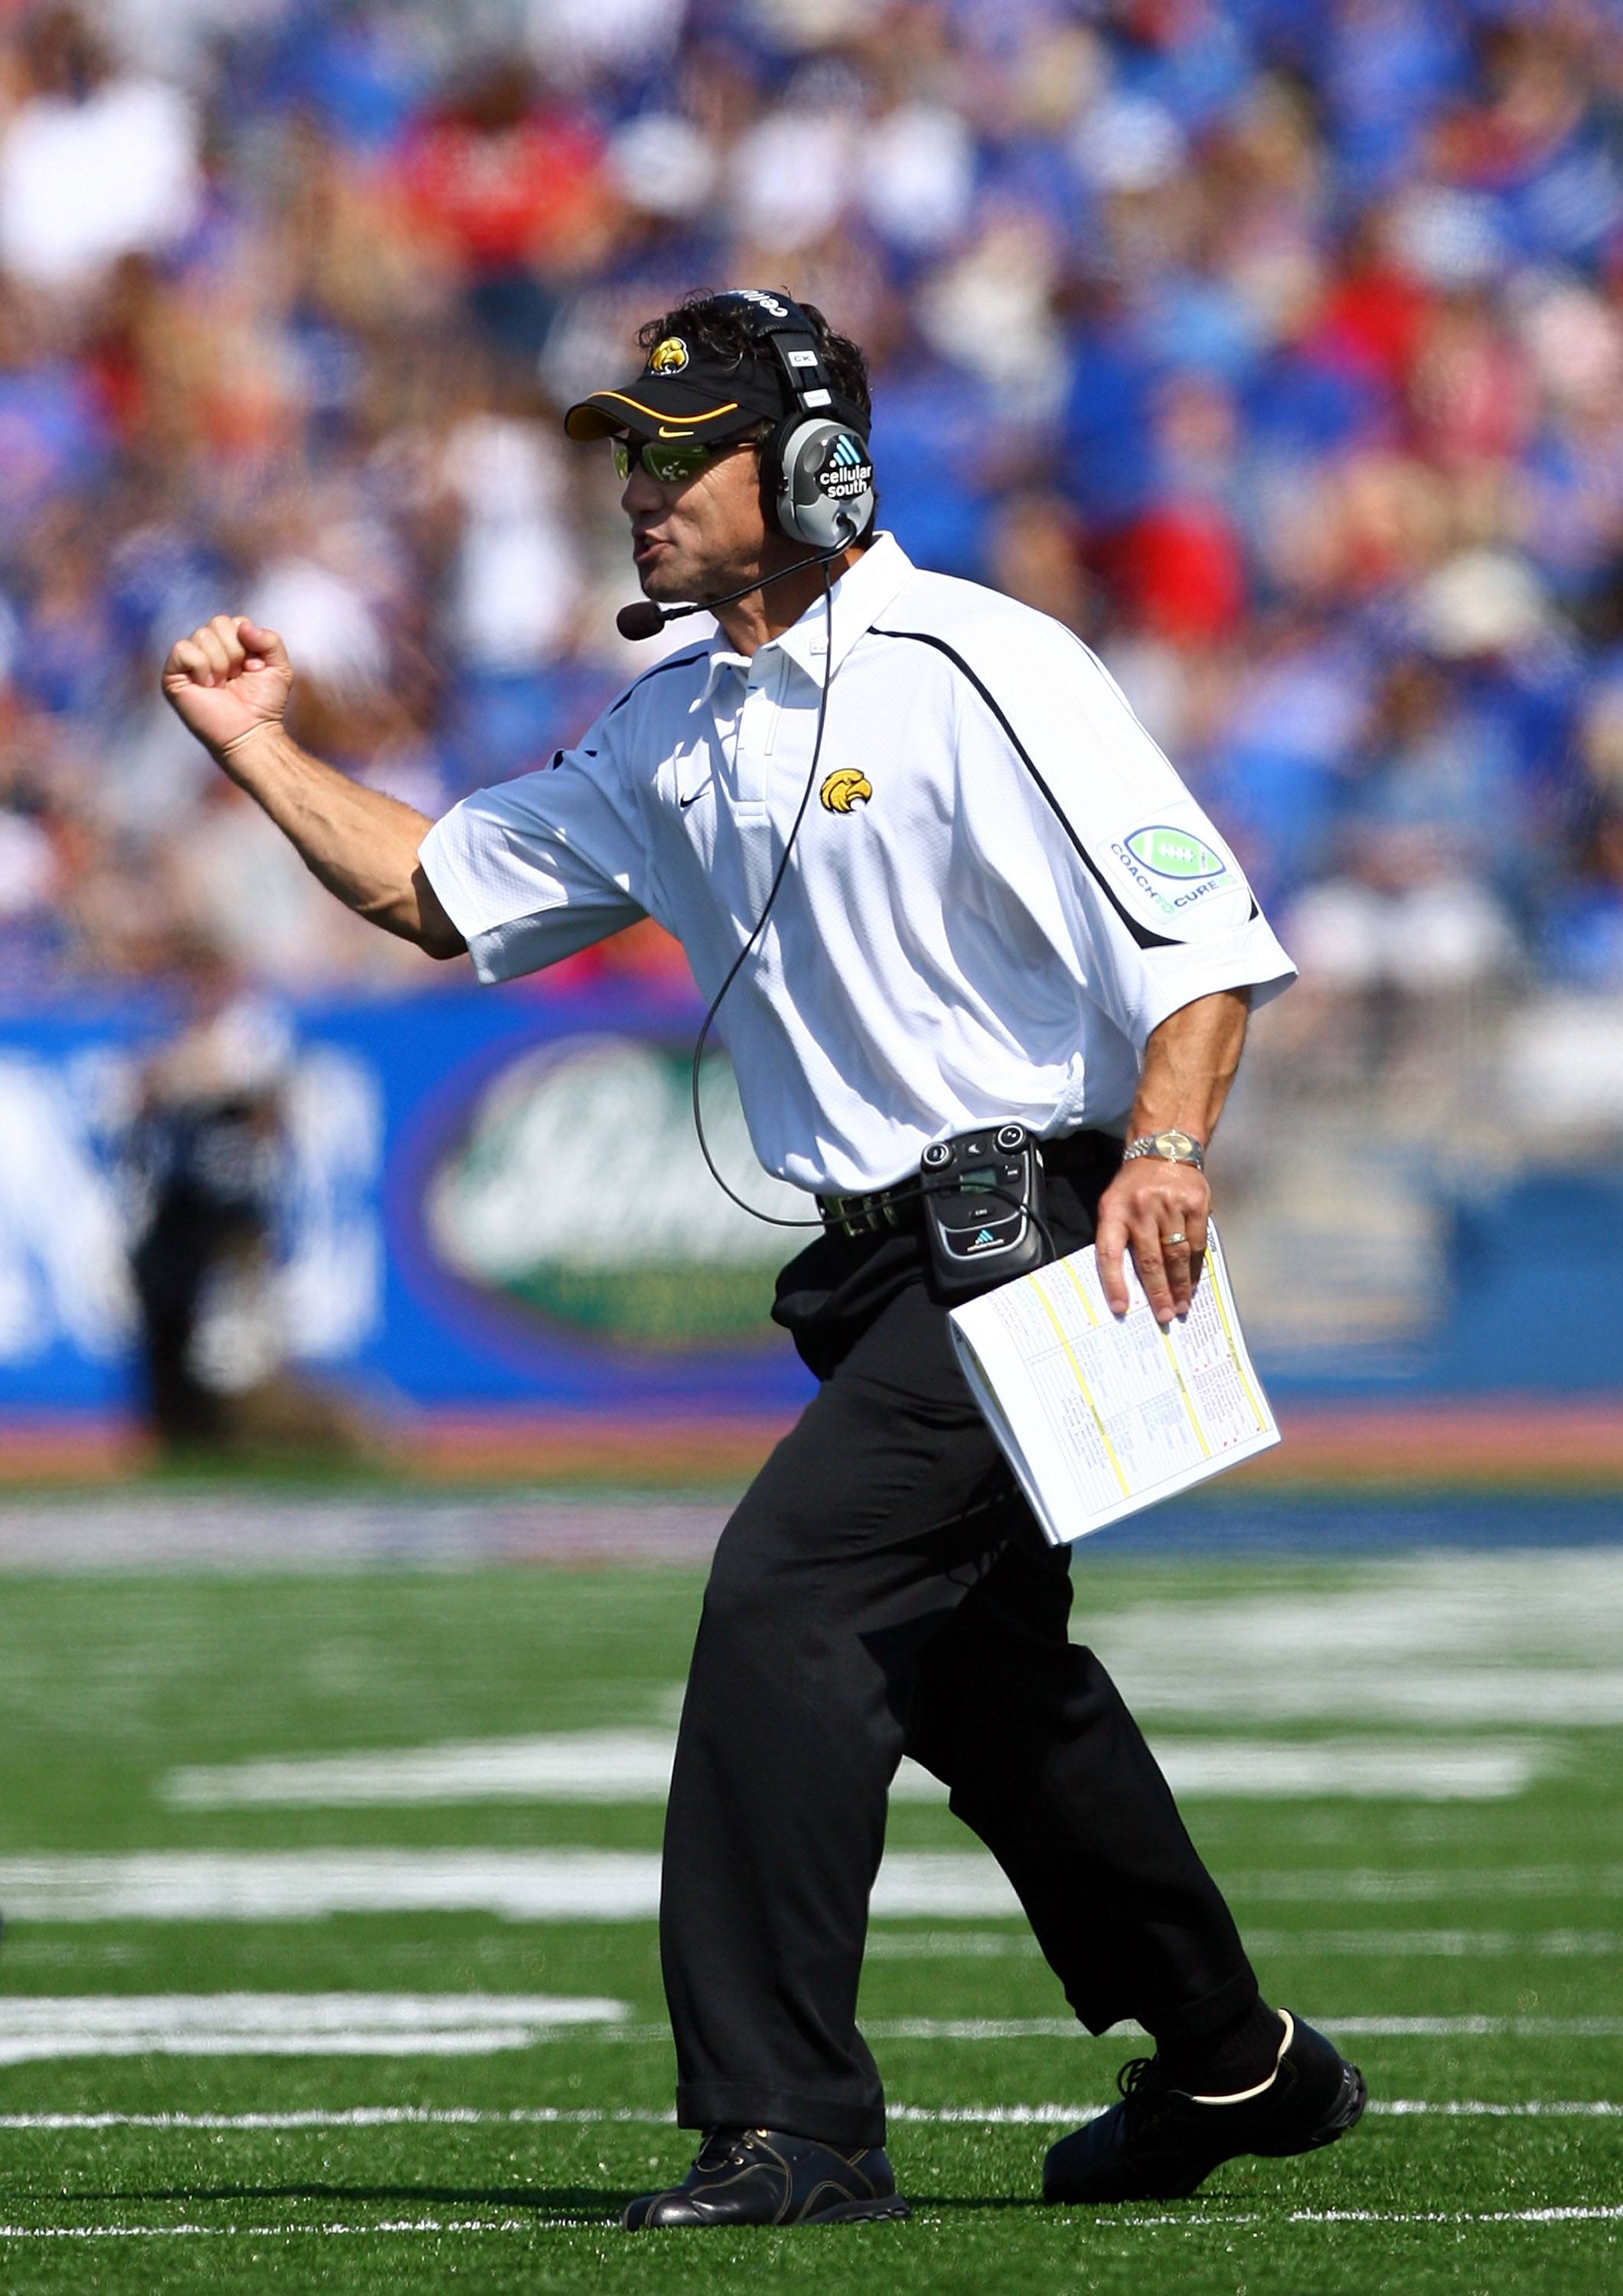 LAWRENCE, KS - SEPTEMBER 26:  Head coach Larry Fedora of the Southern Mississippi Golden Eagles reacts on the sidelines during the game against the Kansas Jayhawks on September 26, 2009 at Memorial Stadium in Lawrence, Kansas.  (Photo by Jamie Squire/Gett